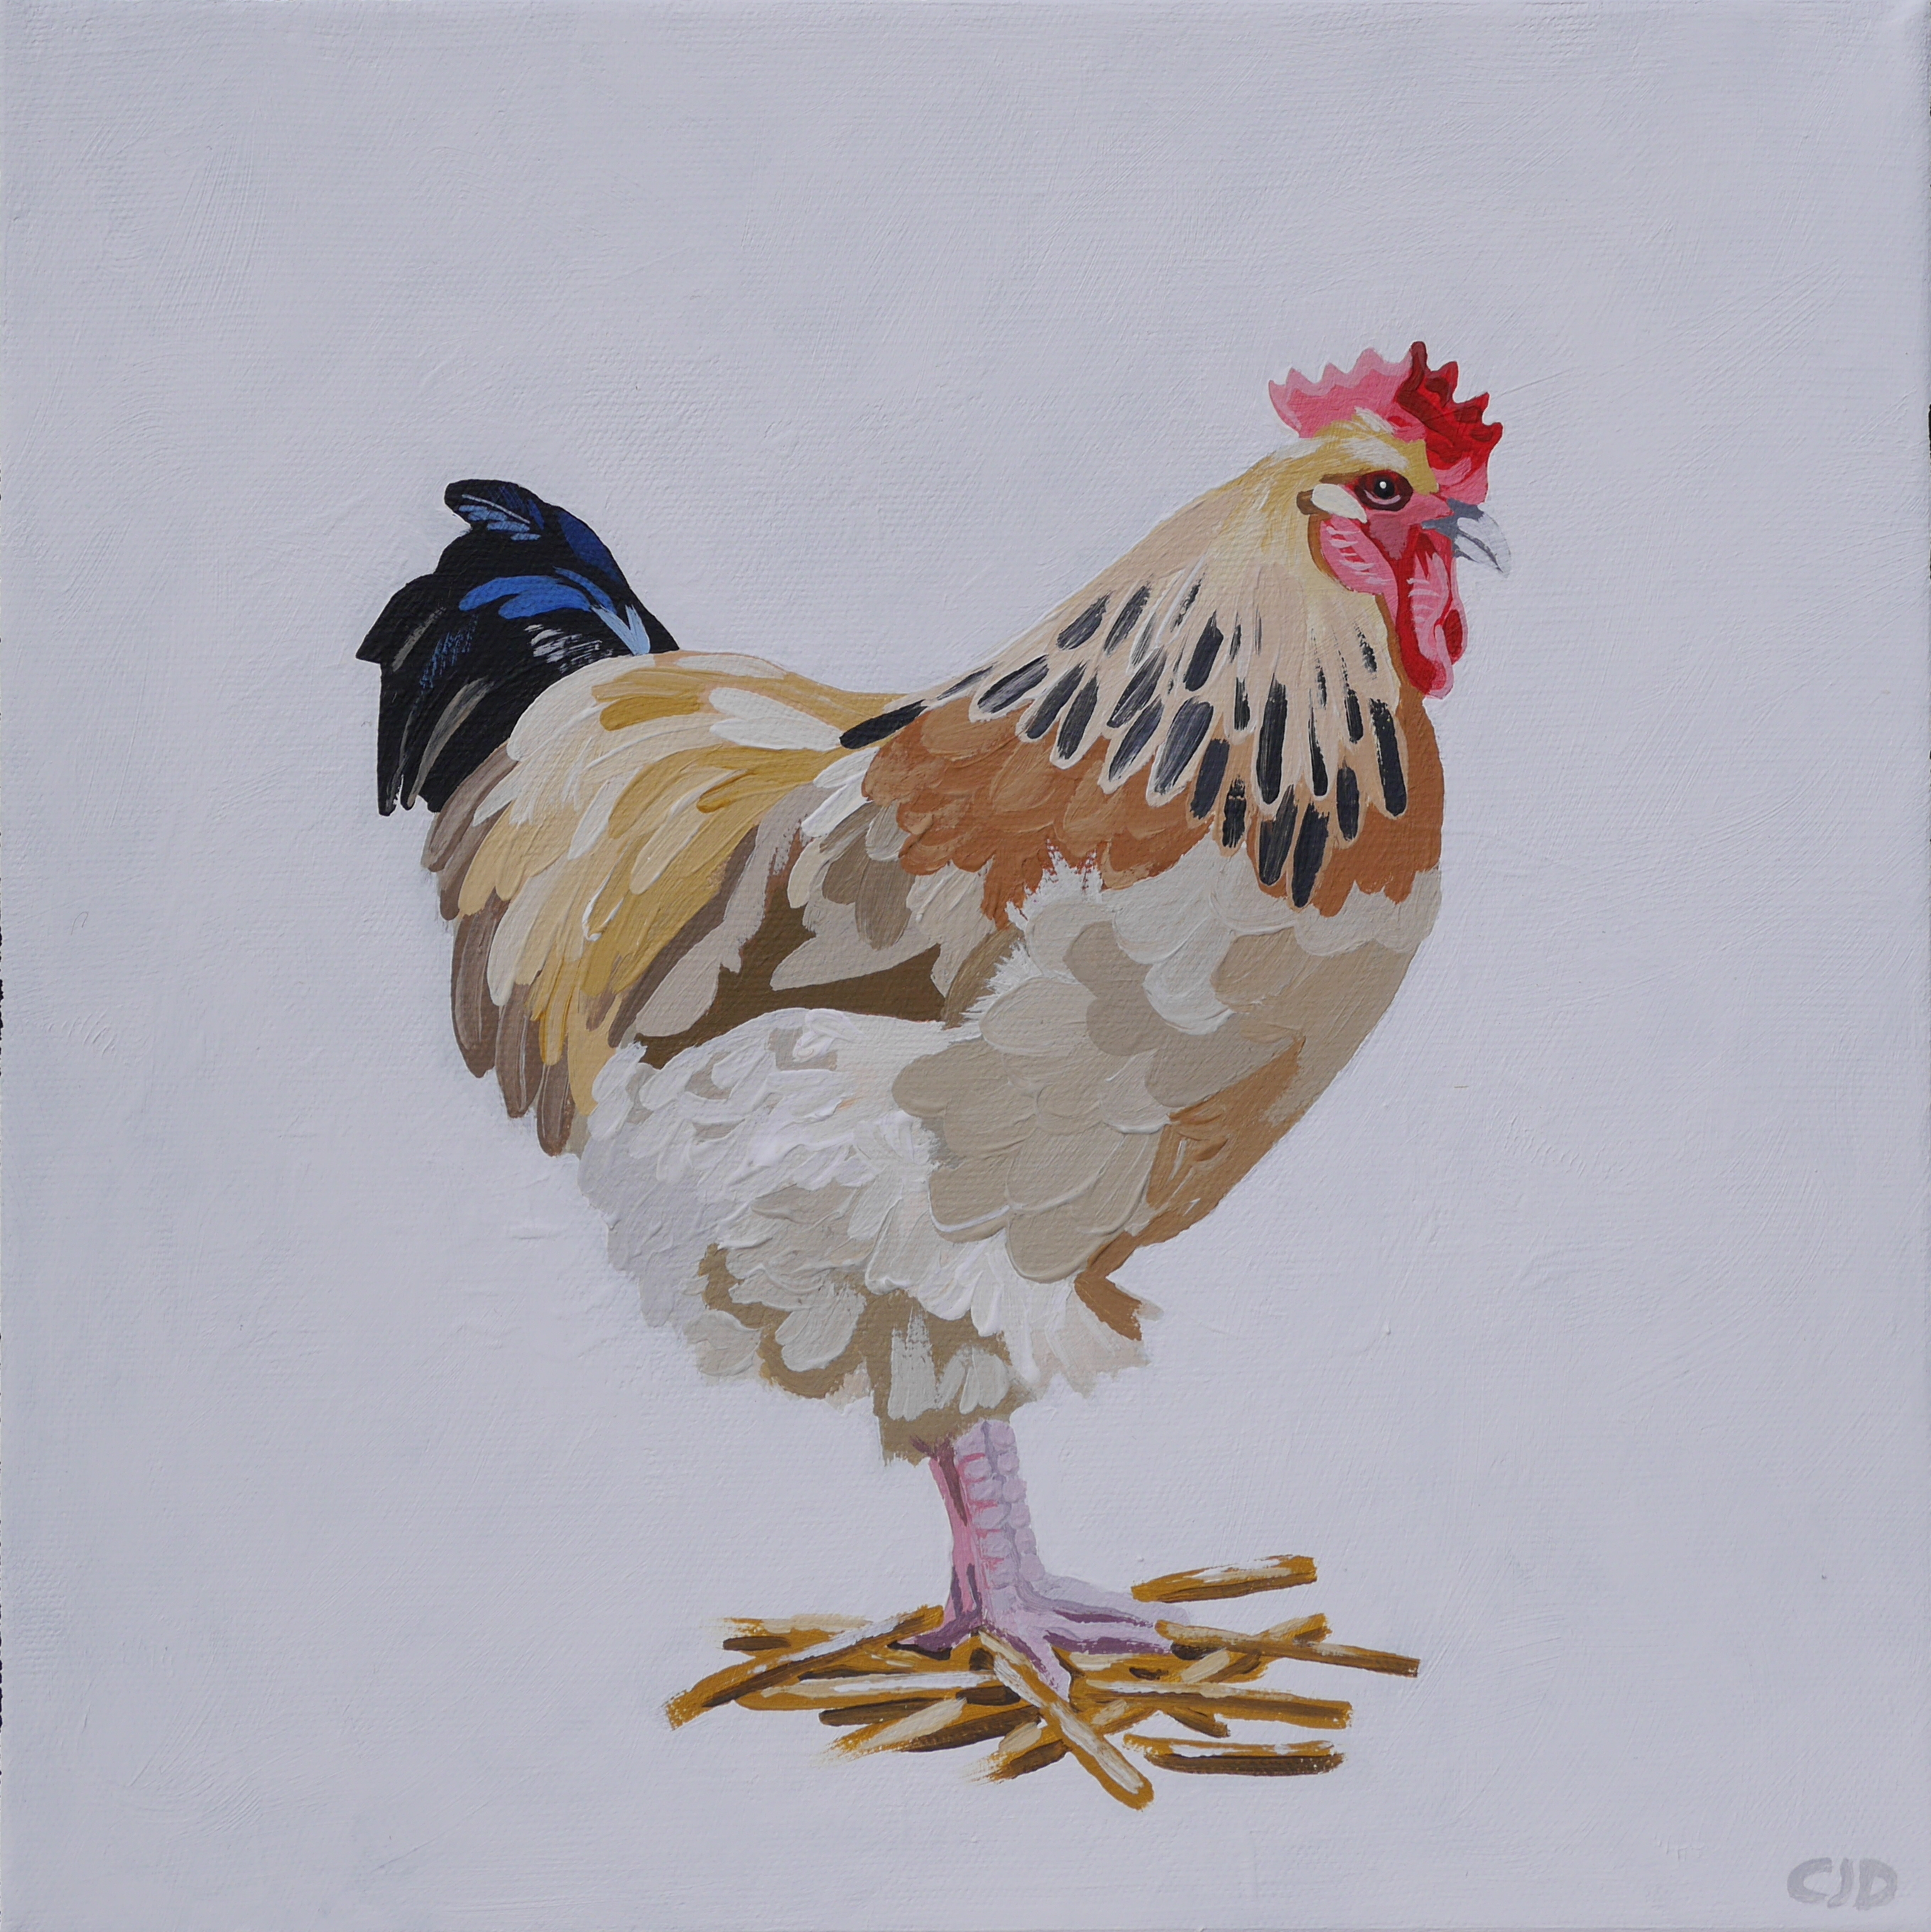 contemporary fine art acrylic painting of a New Hampshire Red chicken in the style of Ladybird book illustrations by saatchiart artist Christian Dodd